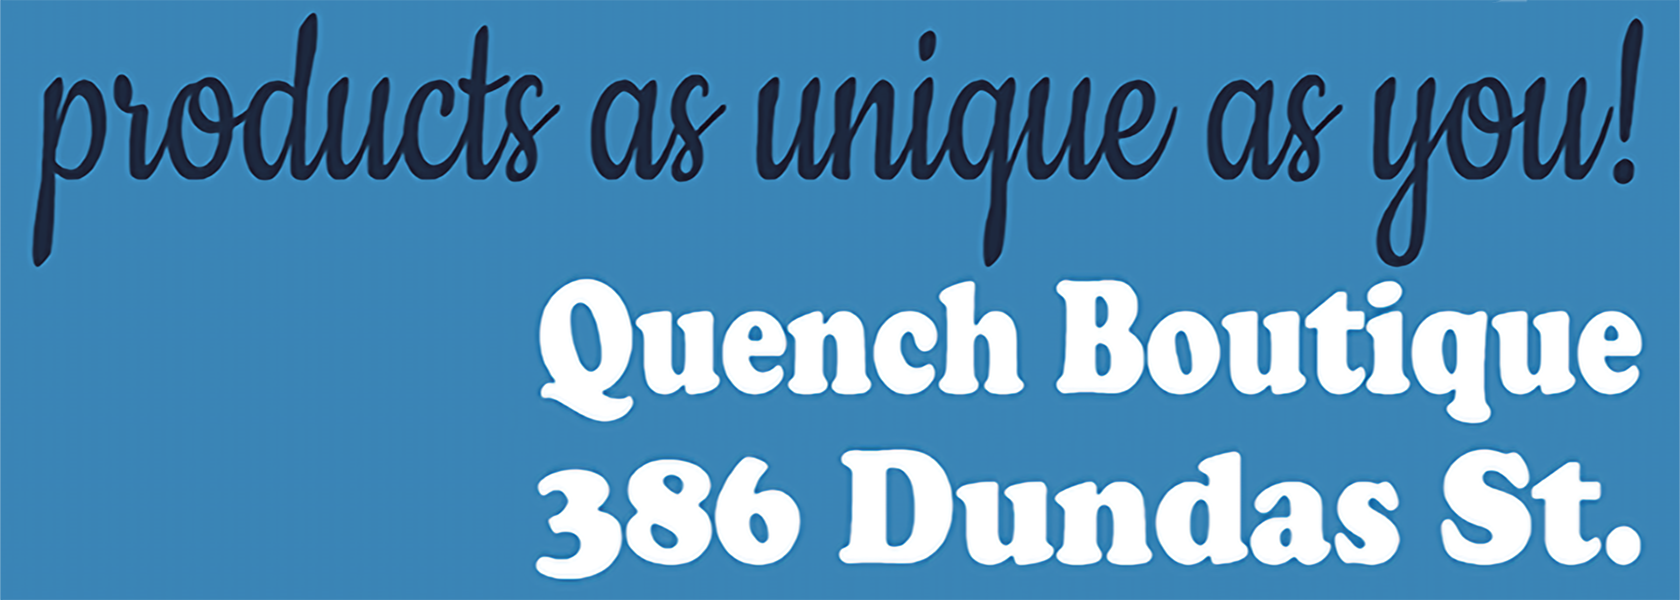 products as unique as you! - quench boutique header image - quench boutique 386 dundas st. woodstock on N4S 1B7